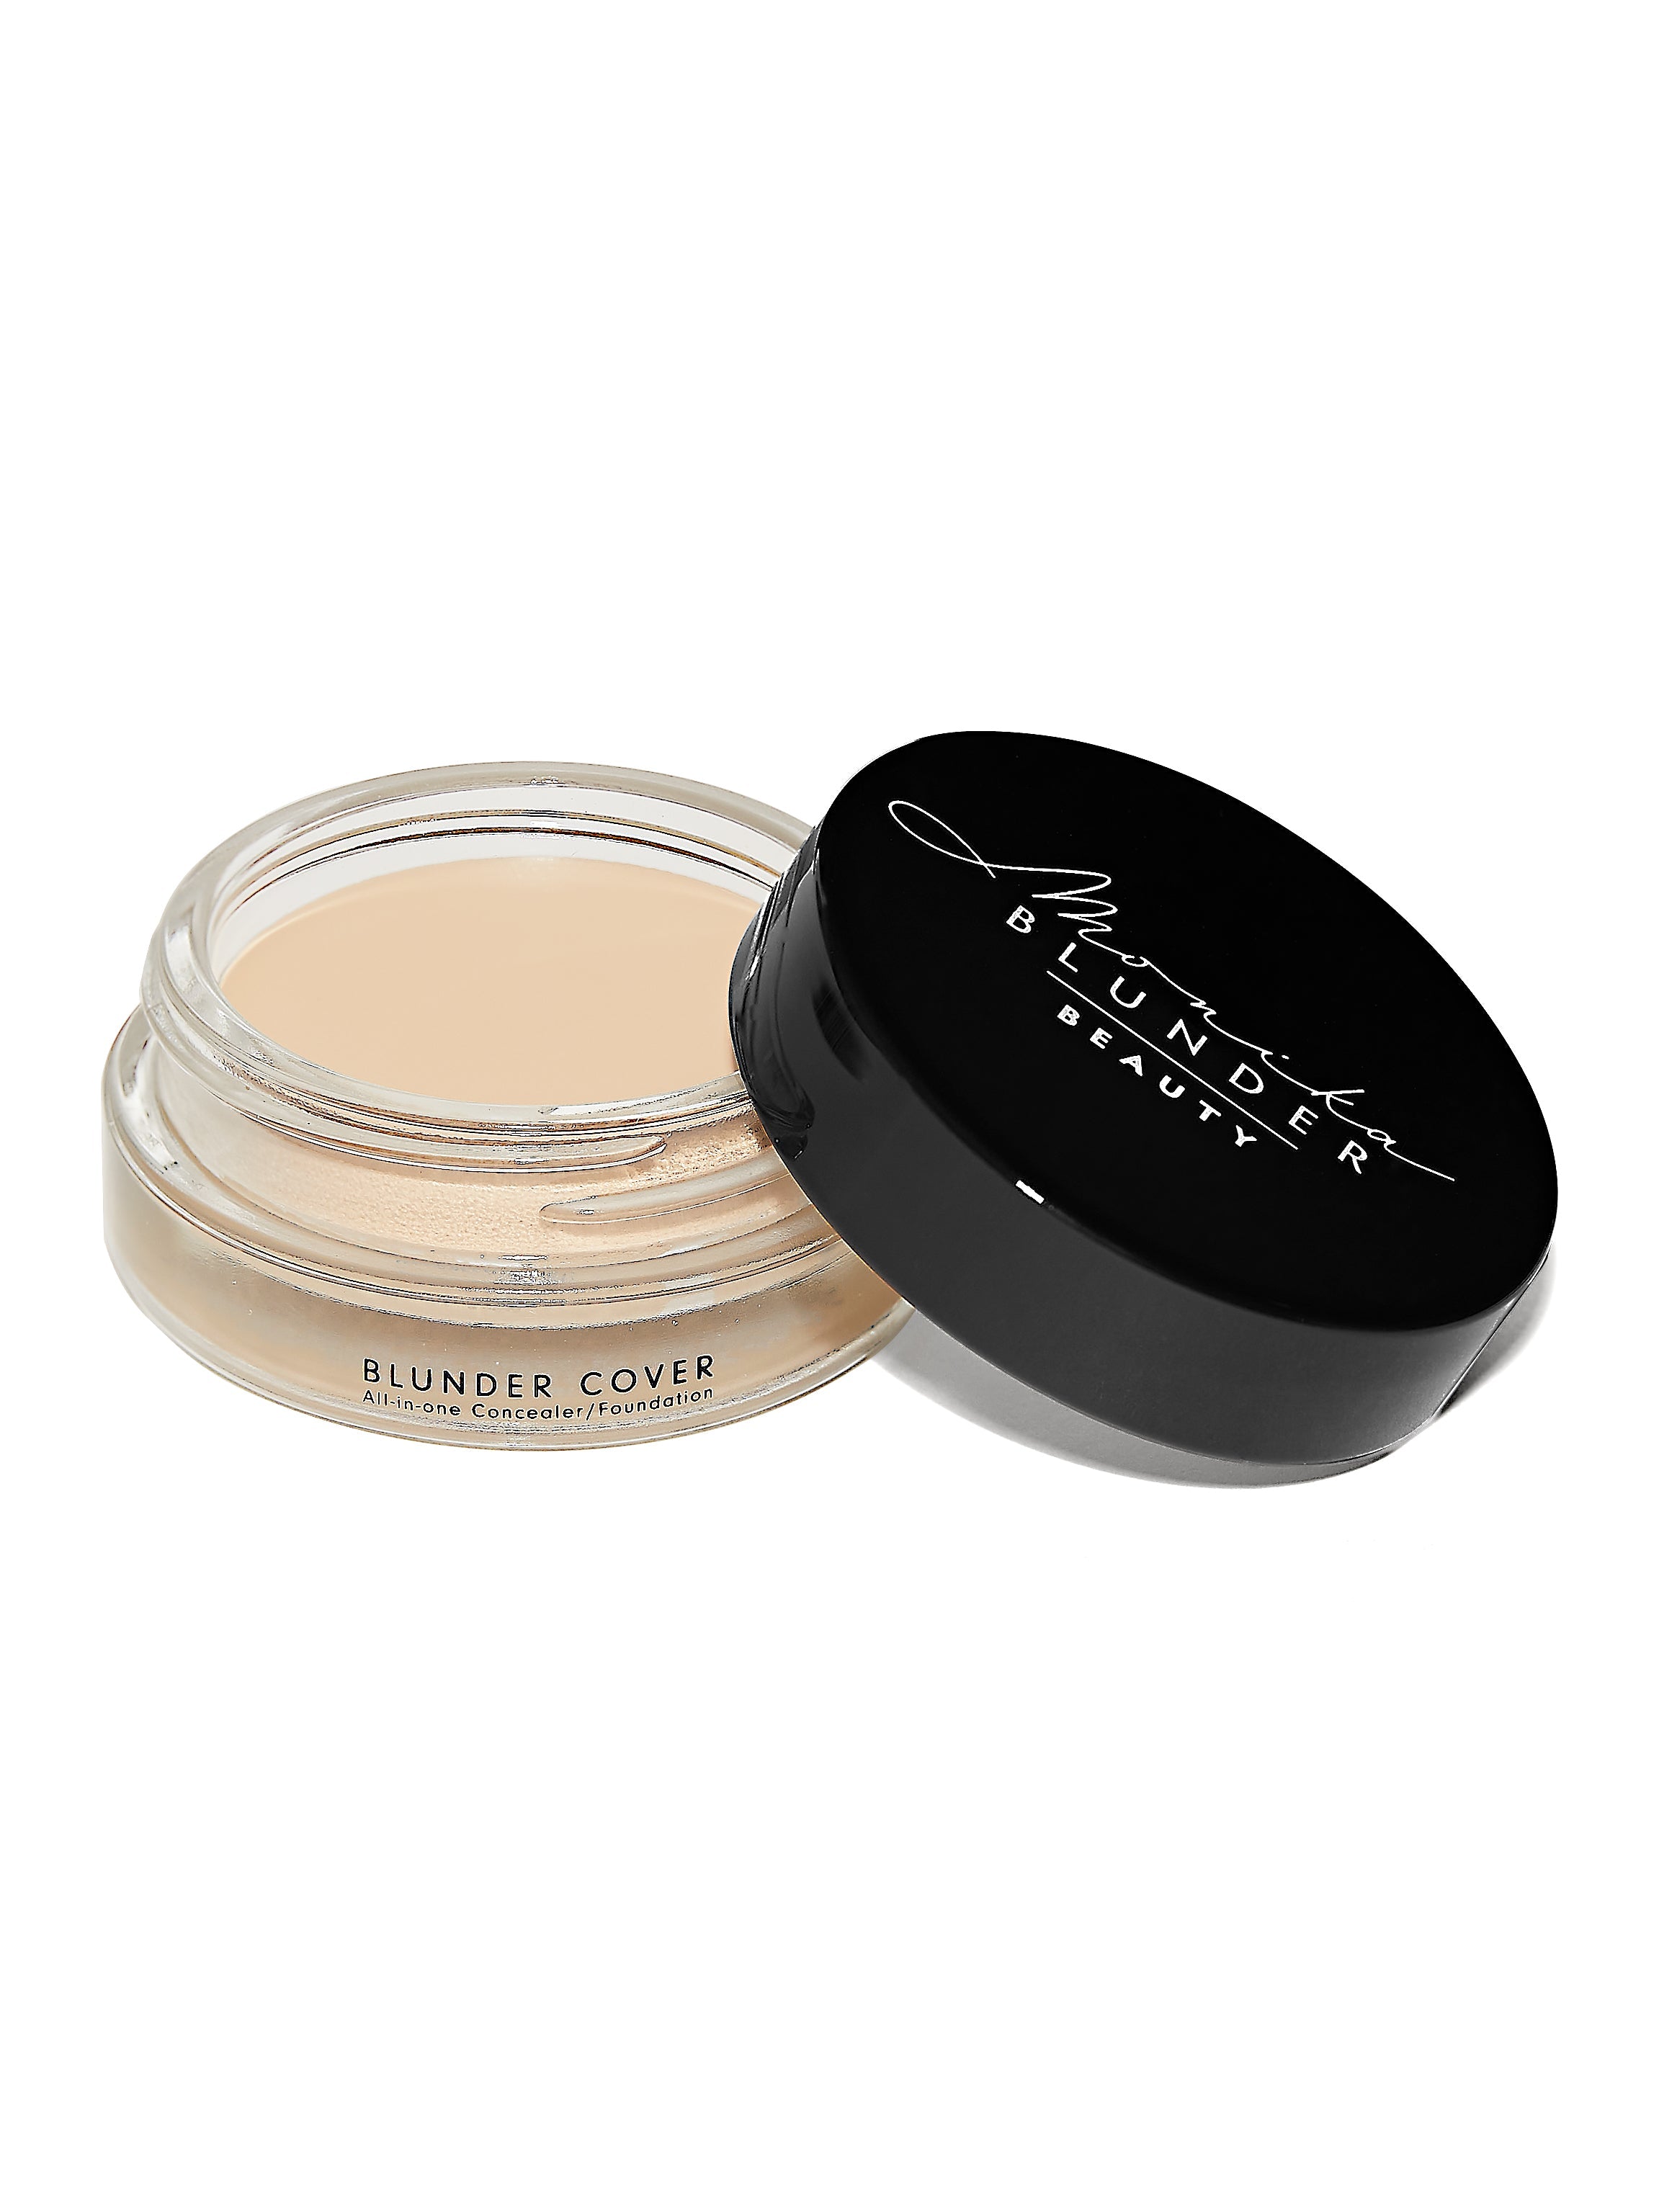 Blunder Cover an All-In-One Foundation/Concealer Shade - Eins - 0